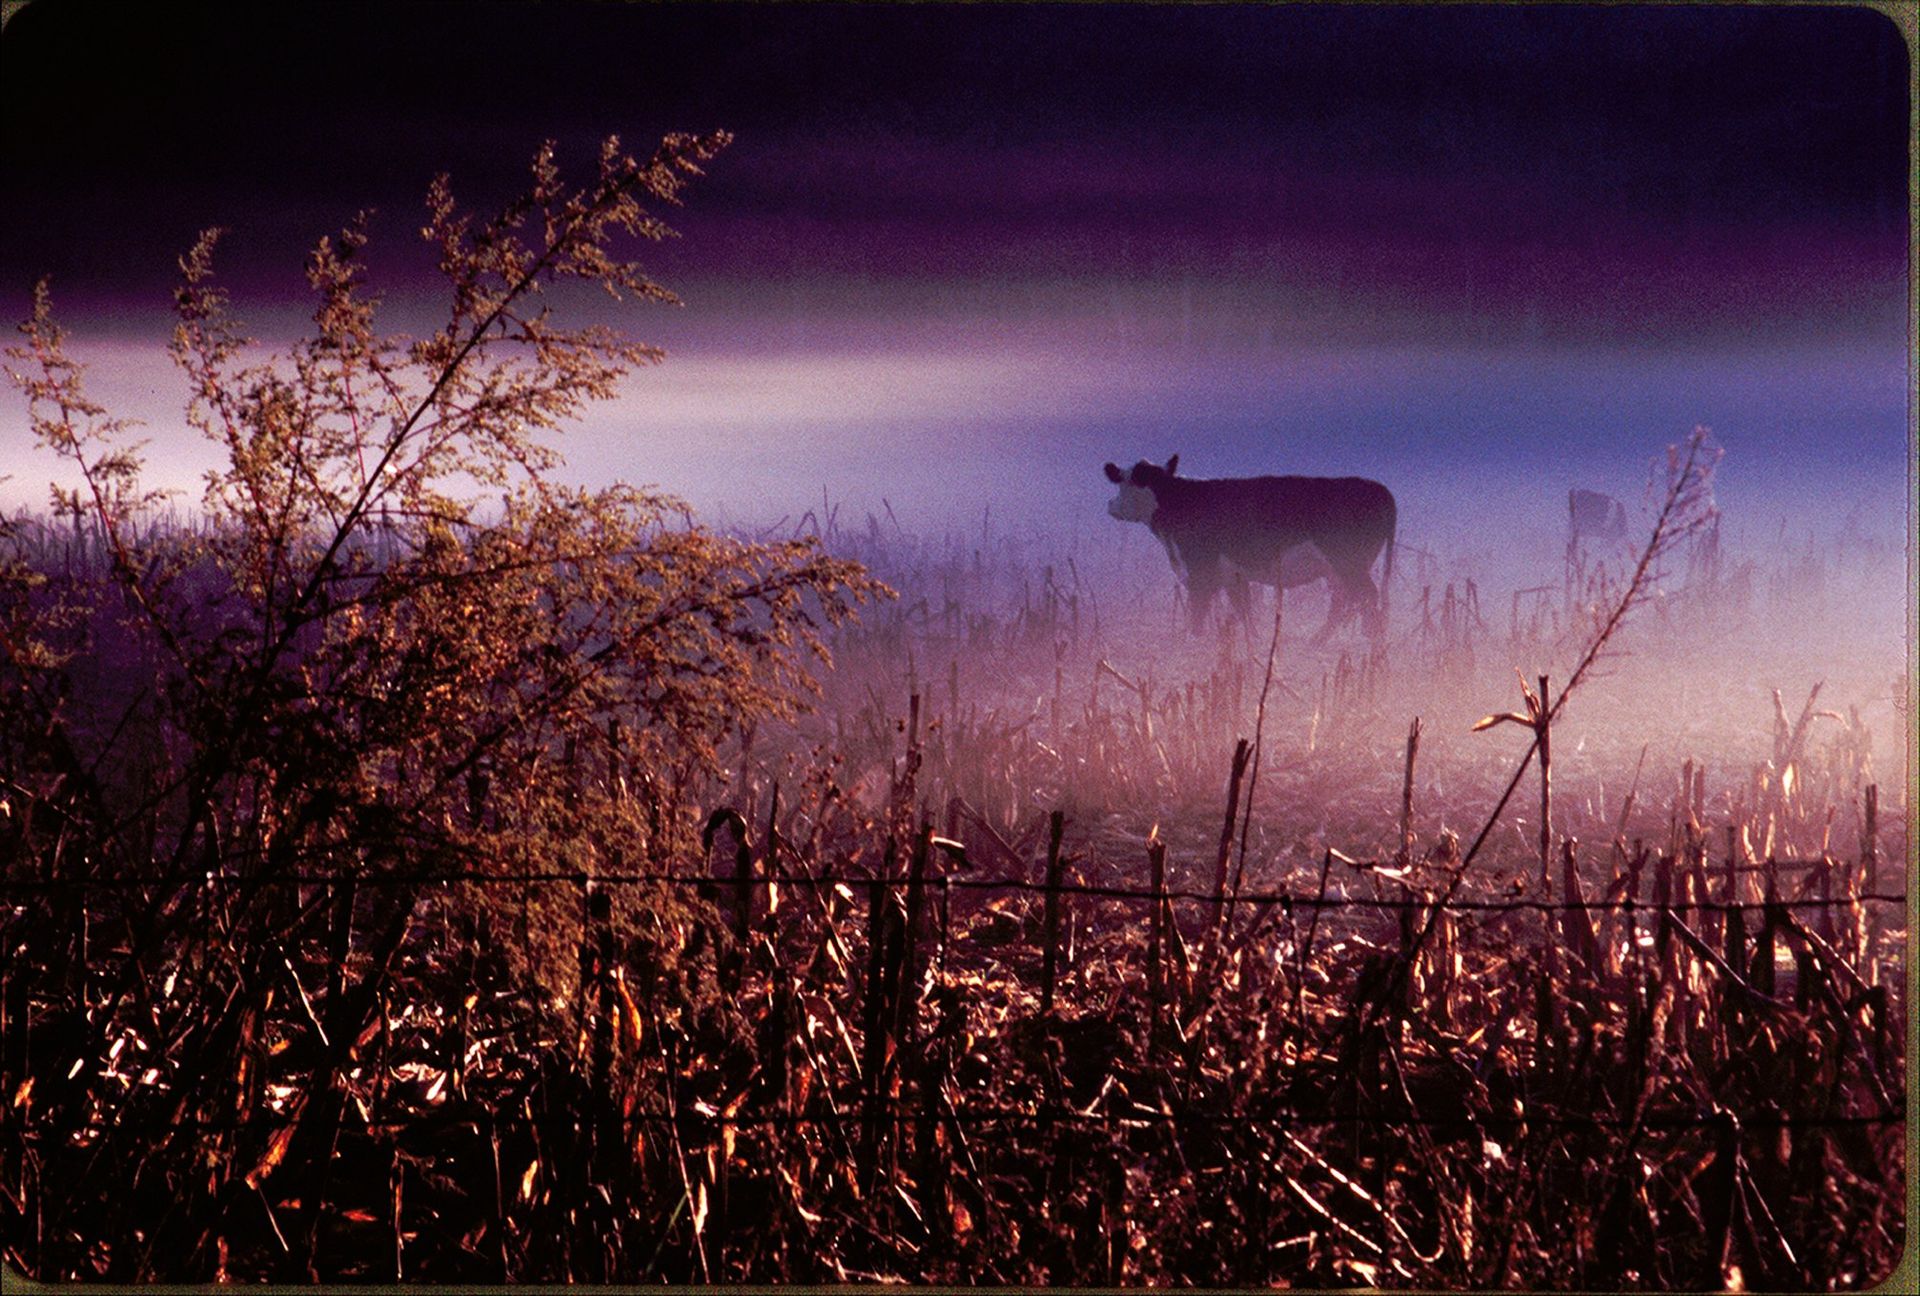 Cow in morning cornfield